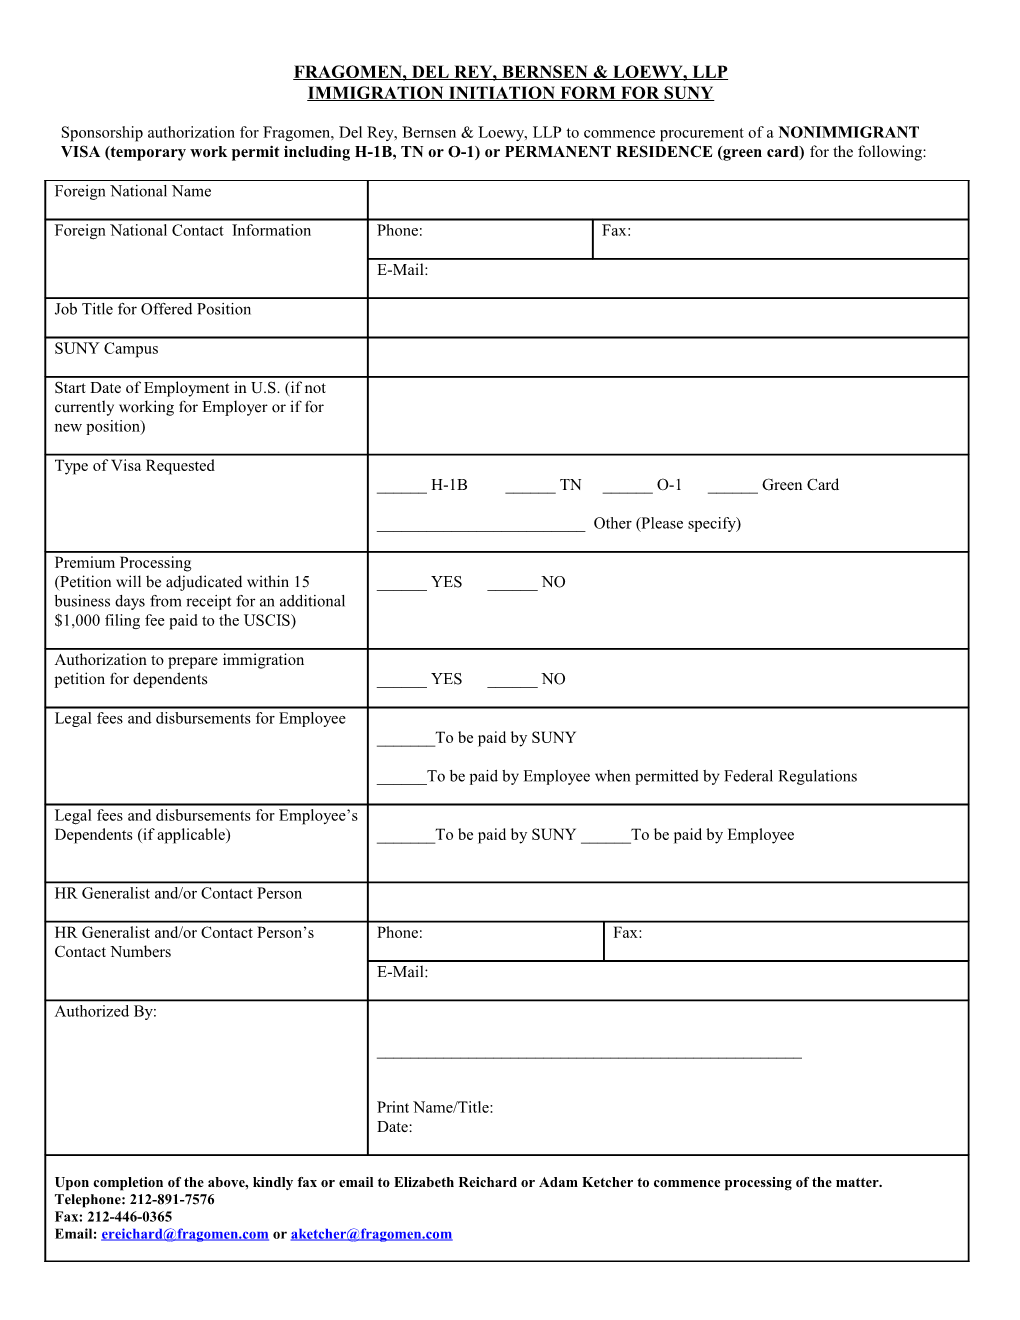 Immigration Initiation Form